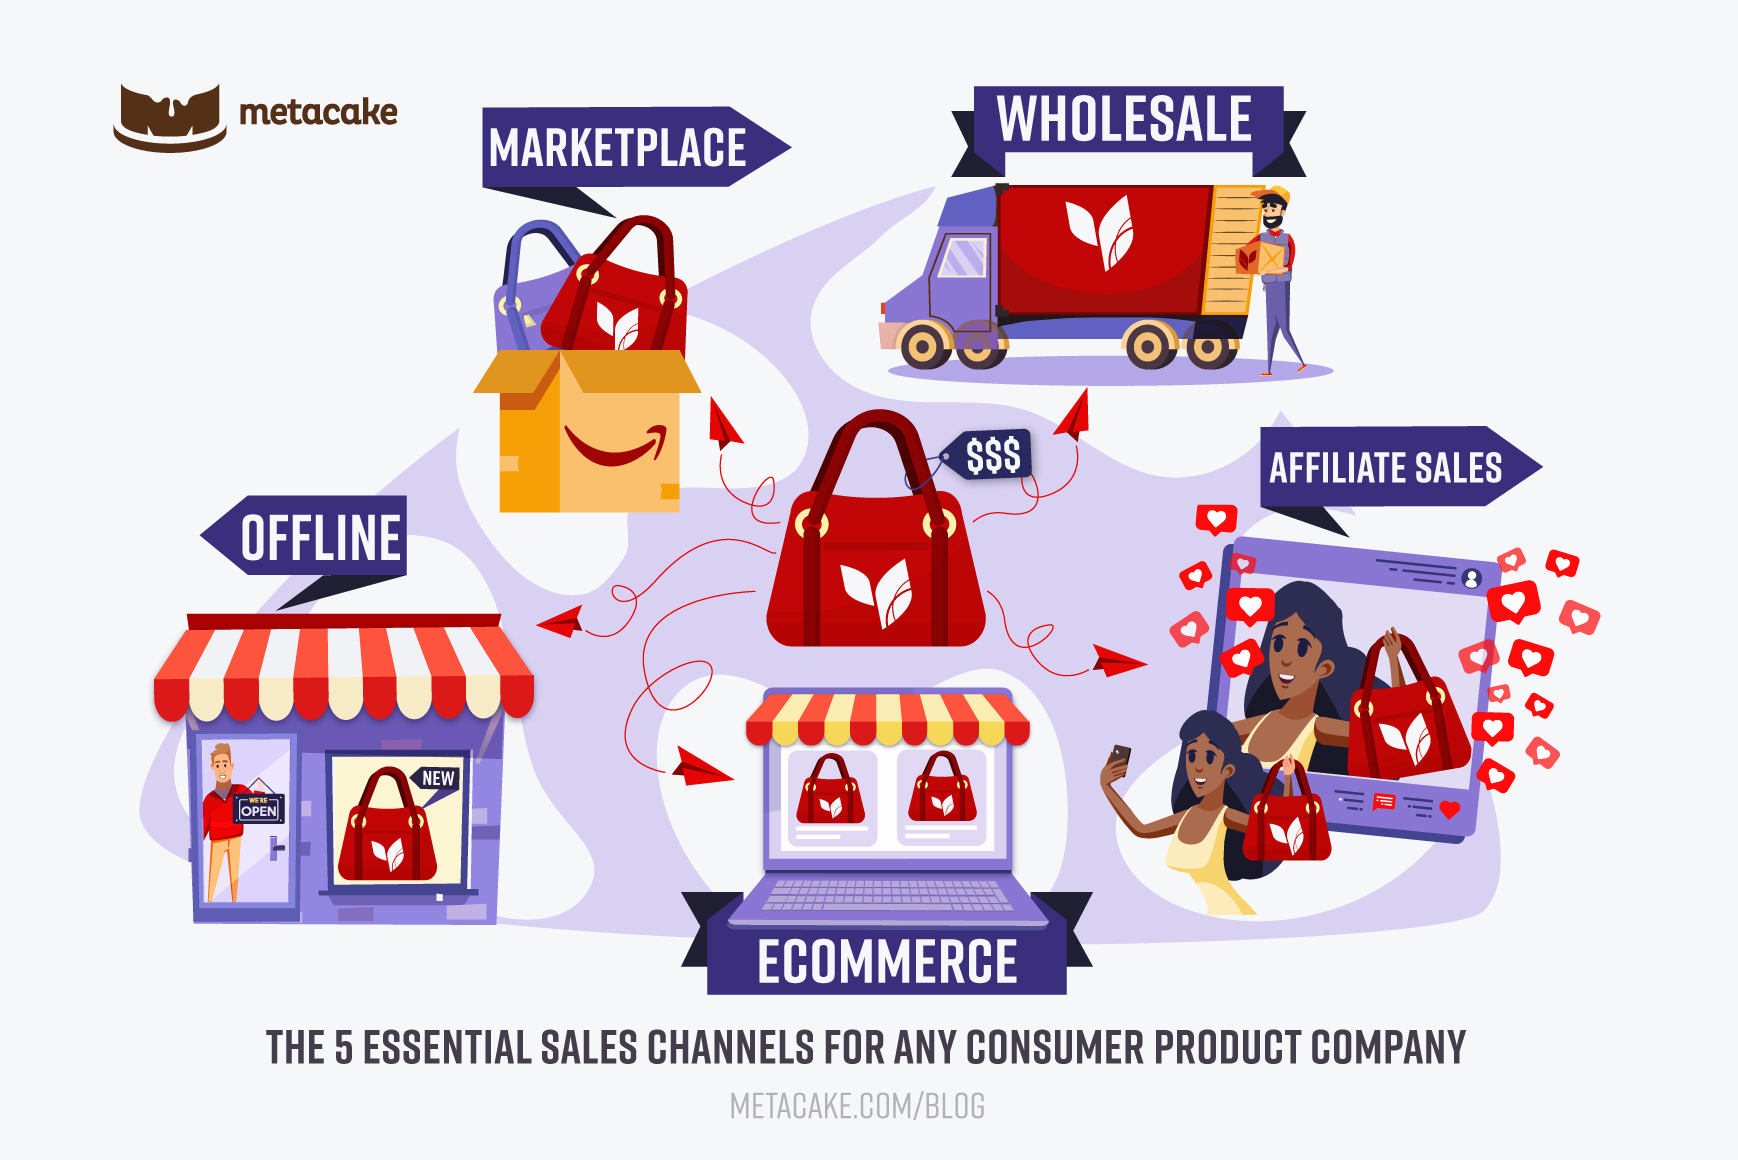 Capturing DTC Ecommerce Sales During Prime Day